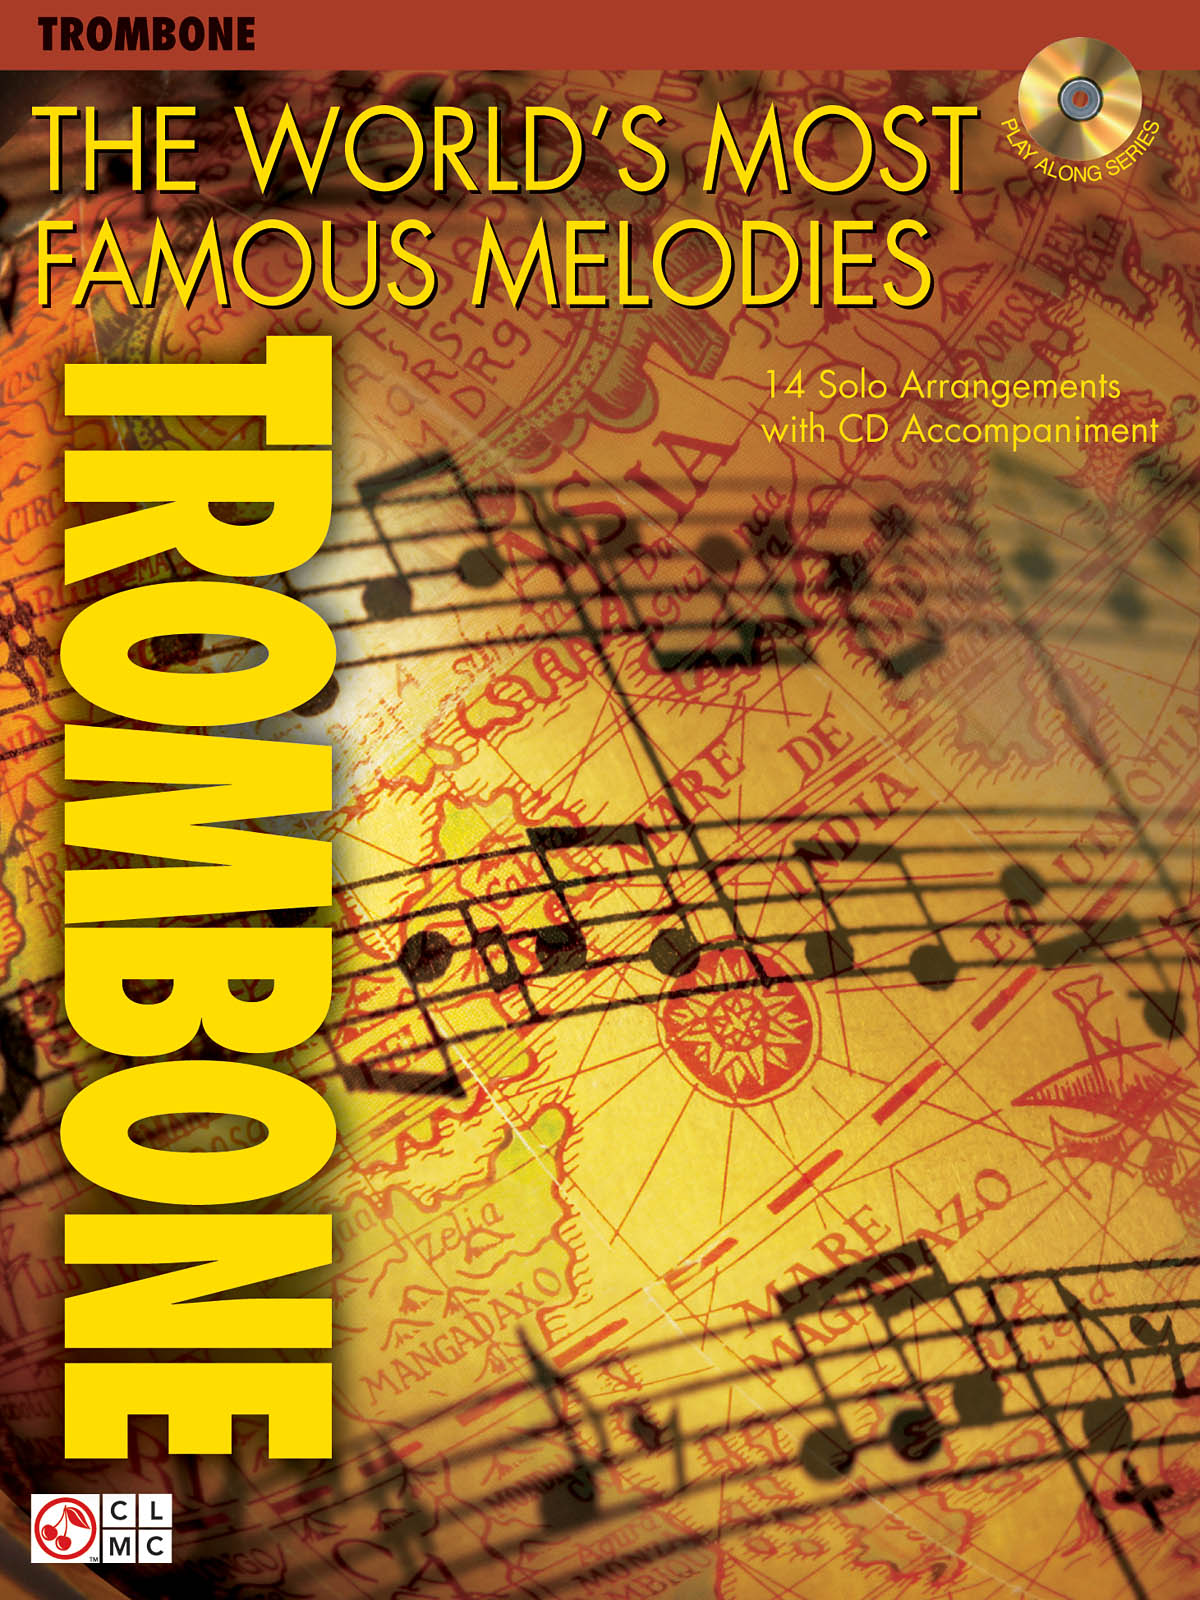 The World's Most Famous Melodies - Trombone: Trombone Solo: Mixed Songbook